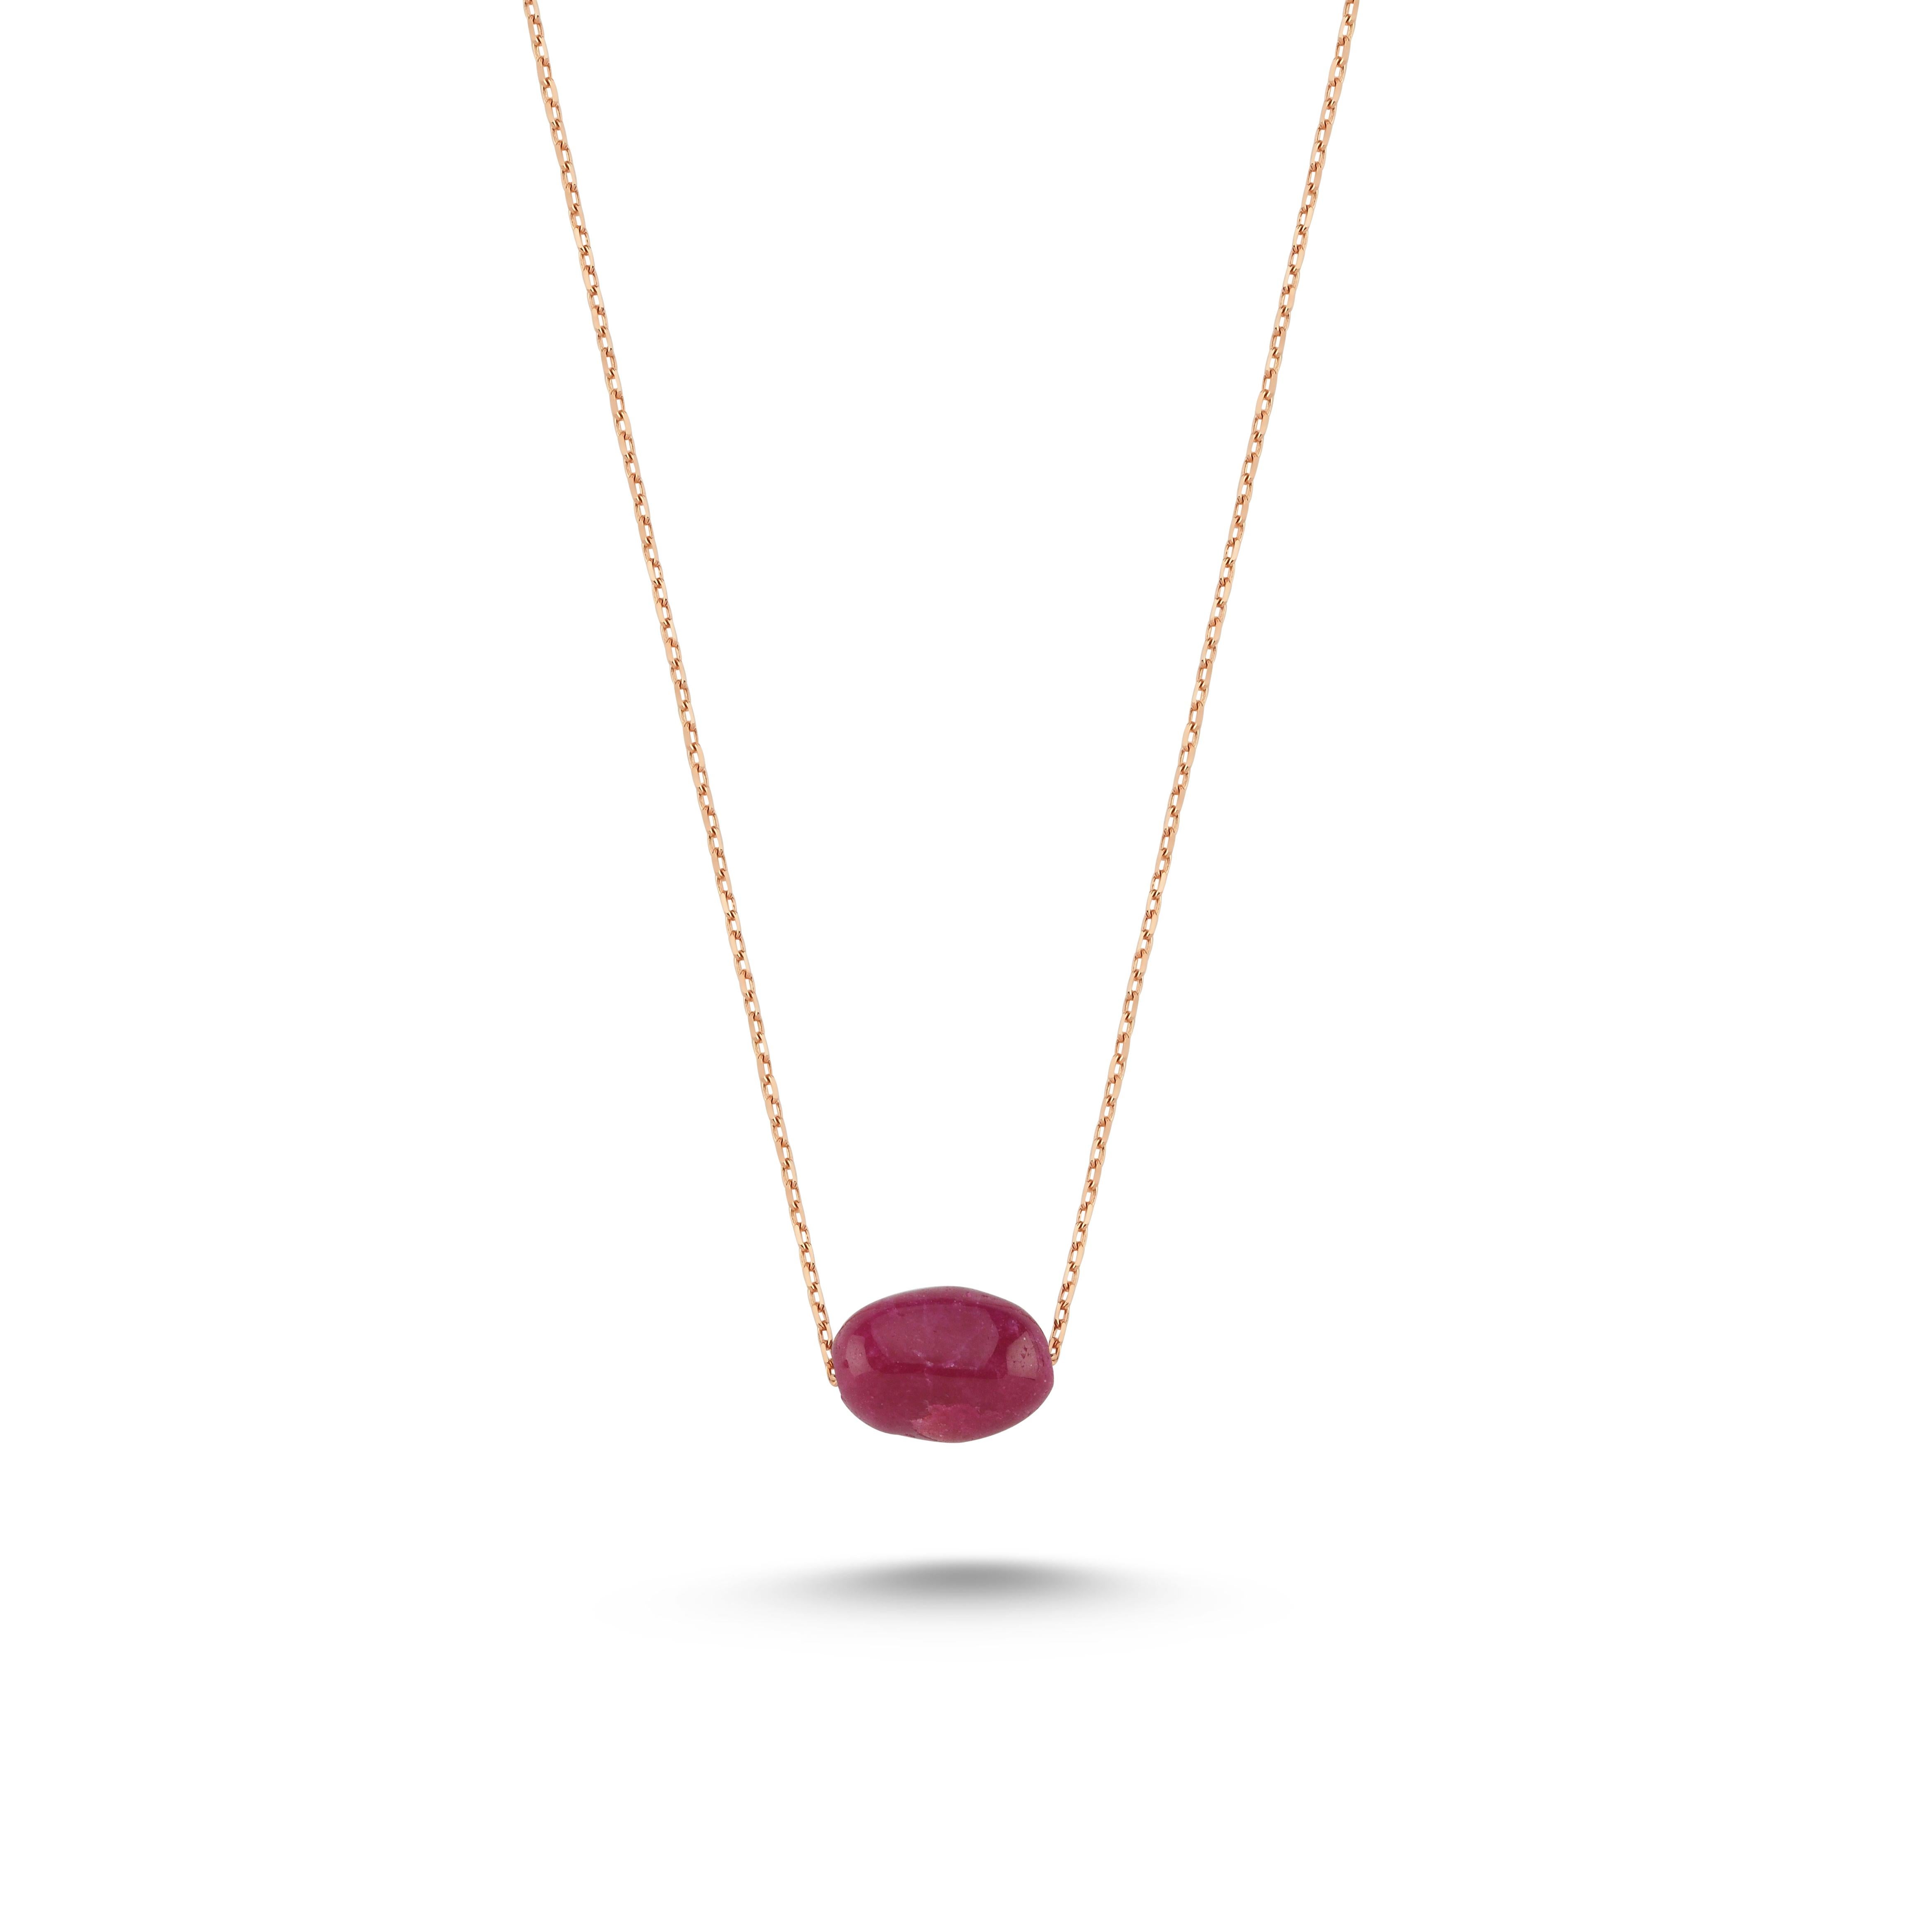 This is a 14K Gold Necklace with natural ruby stone. Rose Gold is an another available option. Please contact us about which one you prefer.